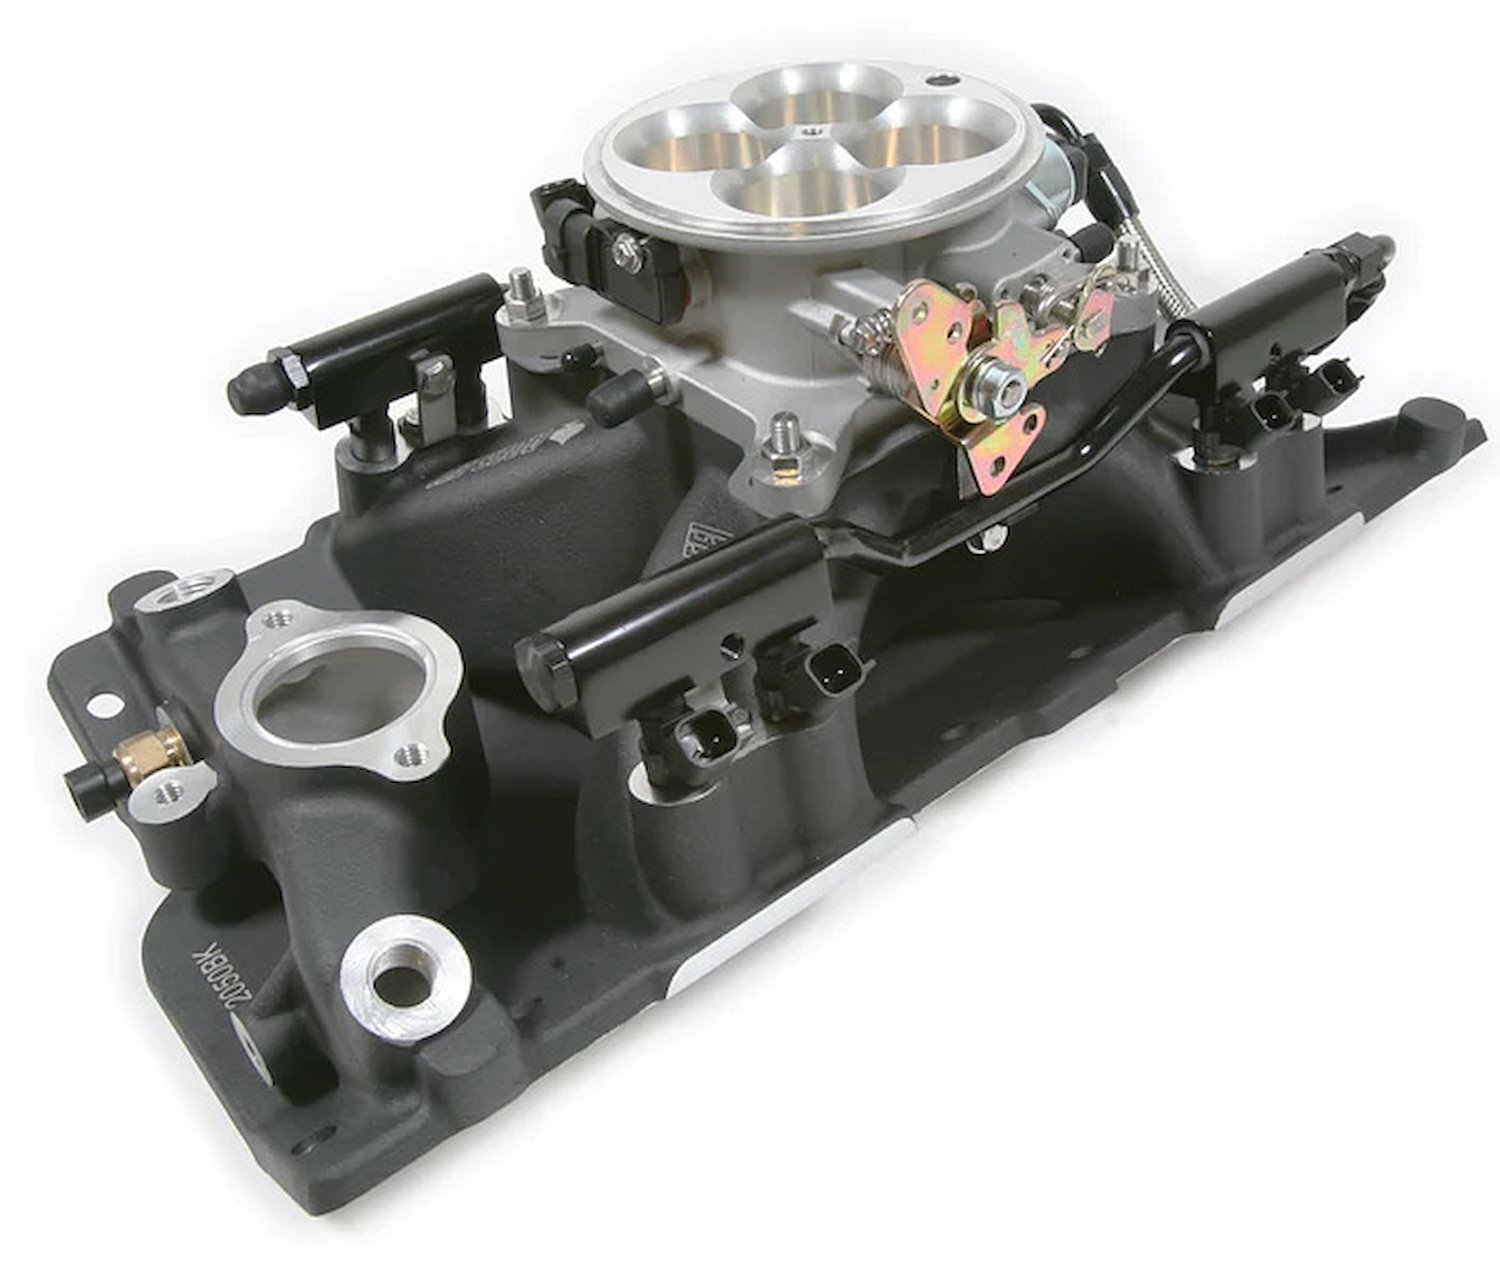 AS2013B-SBC-B4150 Wildcard Sequential Multi-Port Injection EFI System, Small Block Chevy, with Black 4150 Intake Manifold